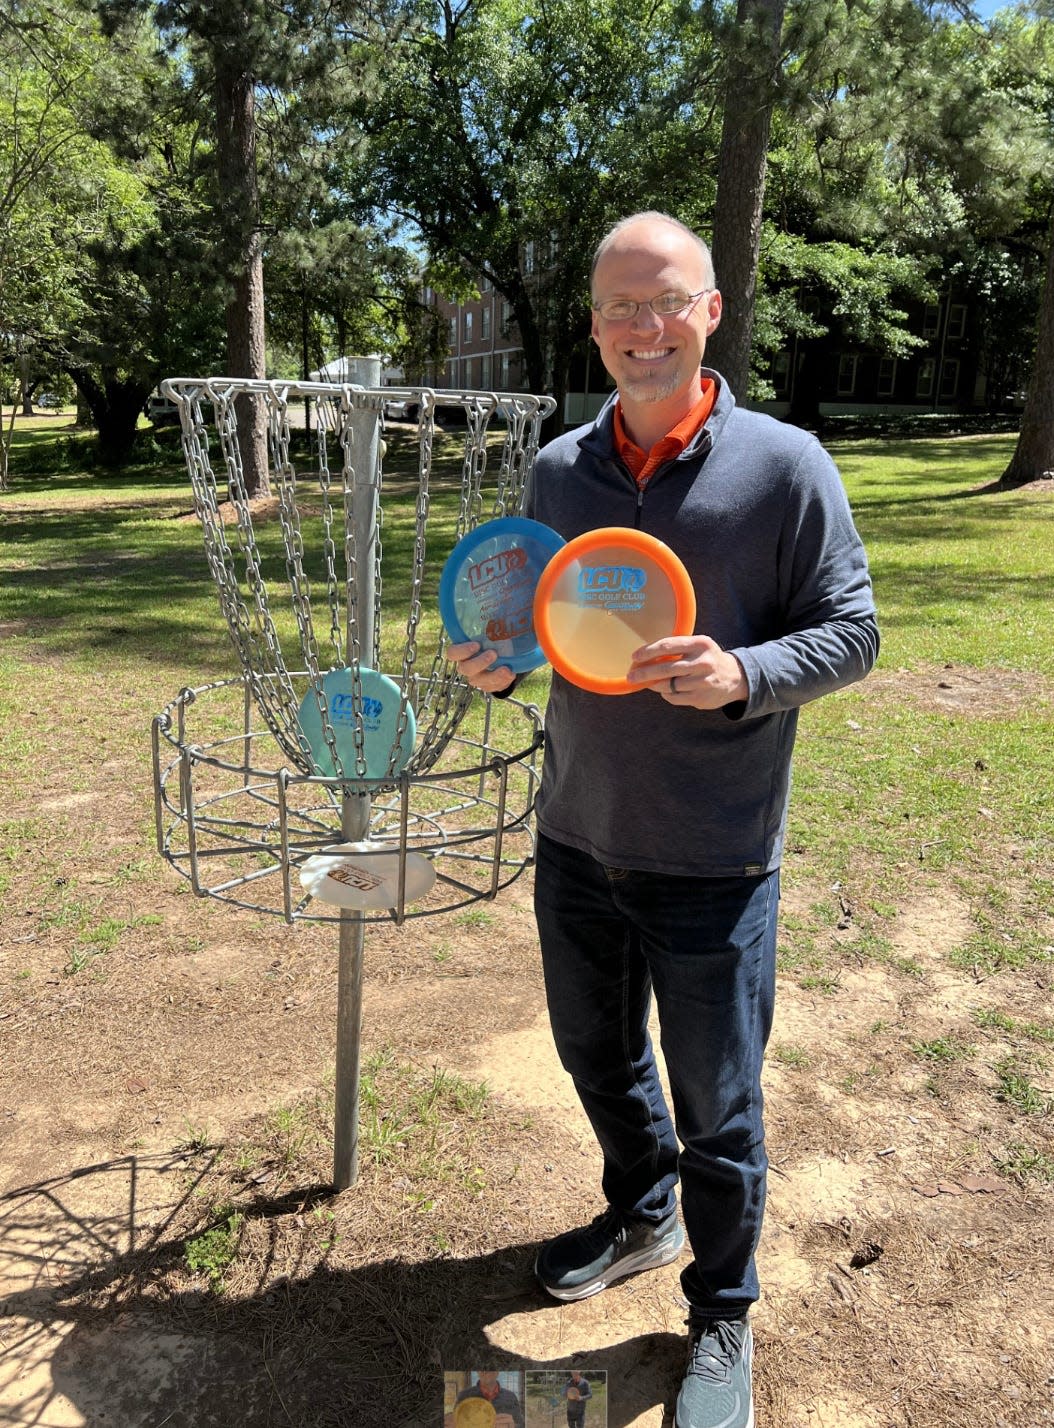 Justin Langford, dean of the School of Ministry and Performing Arts, started playing disc golf when a student introduced him to it.